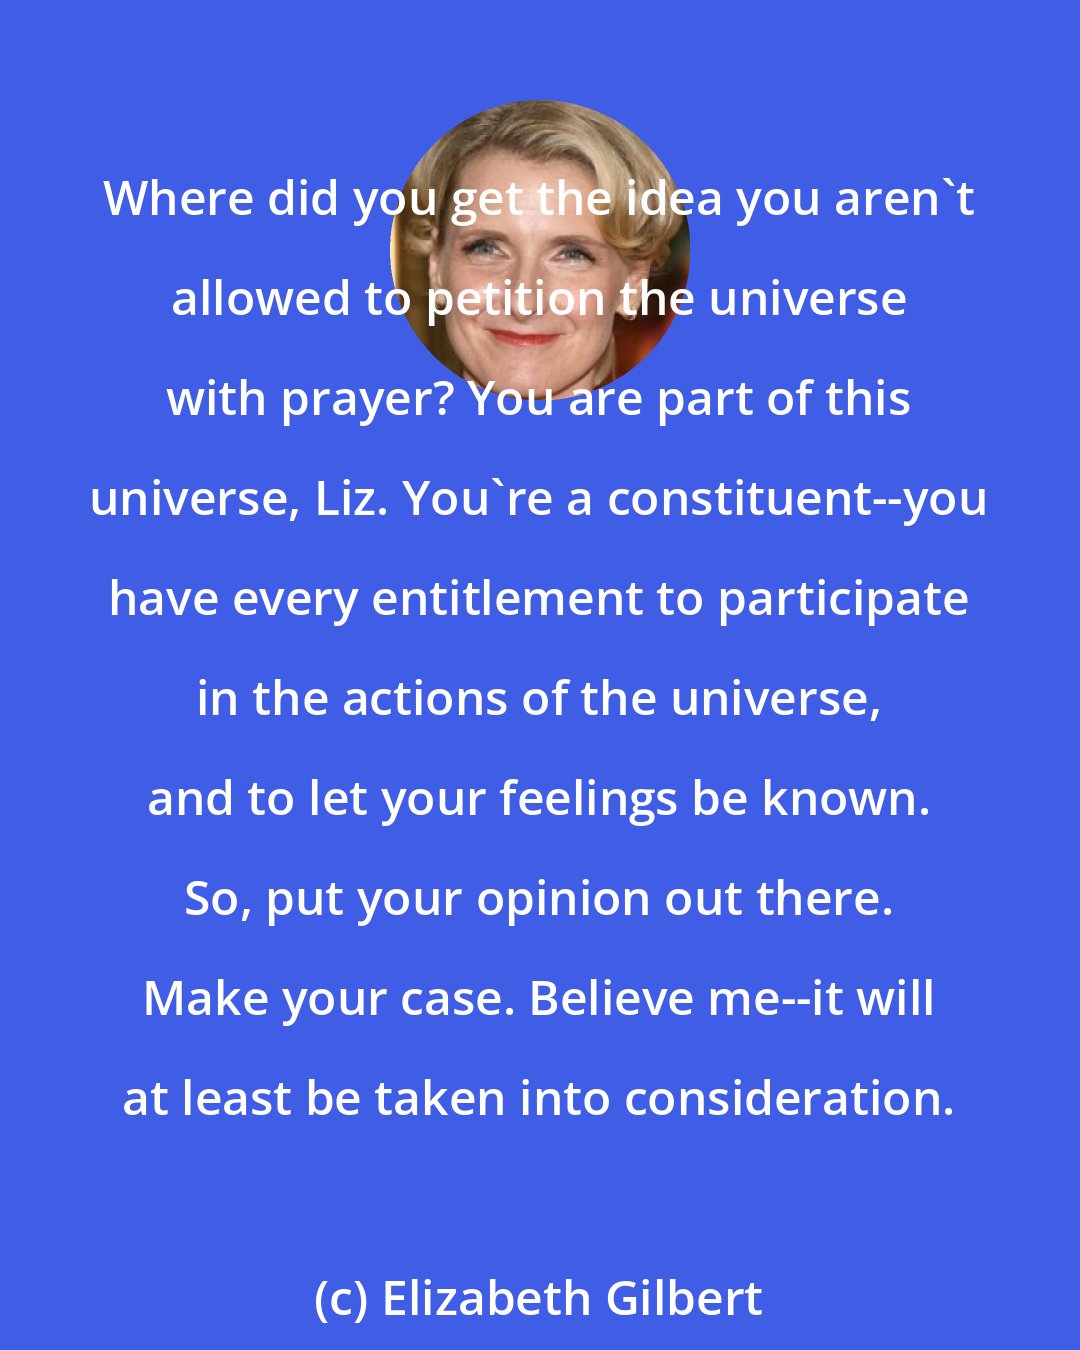 Elizabeth Gilbert: Where did you get the idea you aren't allowed to petition the universe with prayer? You are part of this universe, Liz. You're a constituent--you have every entitlement to participate in the actions of the universe, and to let your feelings be known. So, put your opinion out there. Make your case. Believe me--it will at least be taken into consideration.